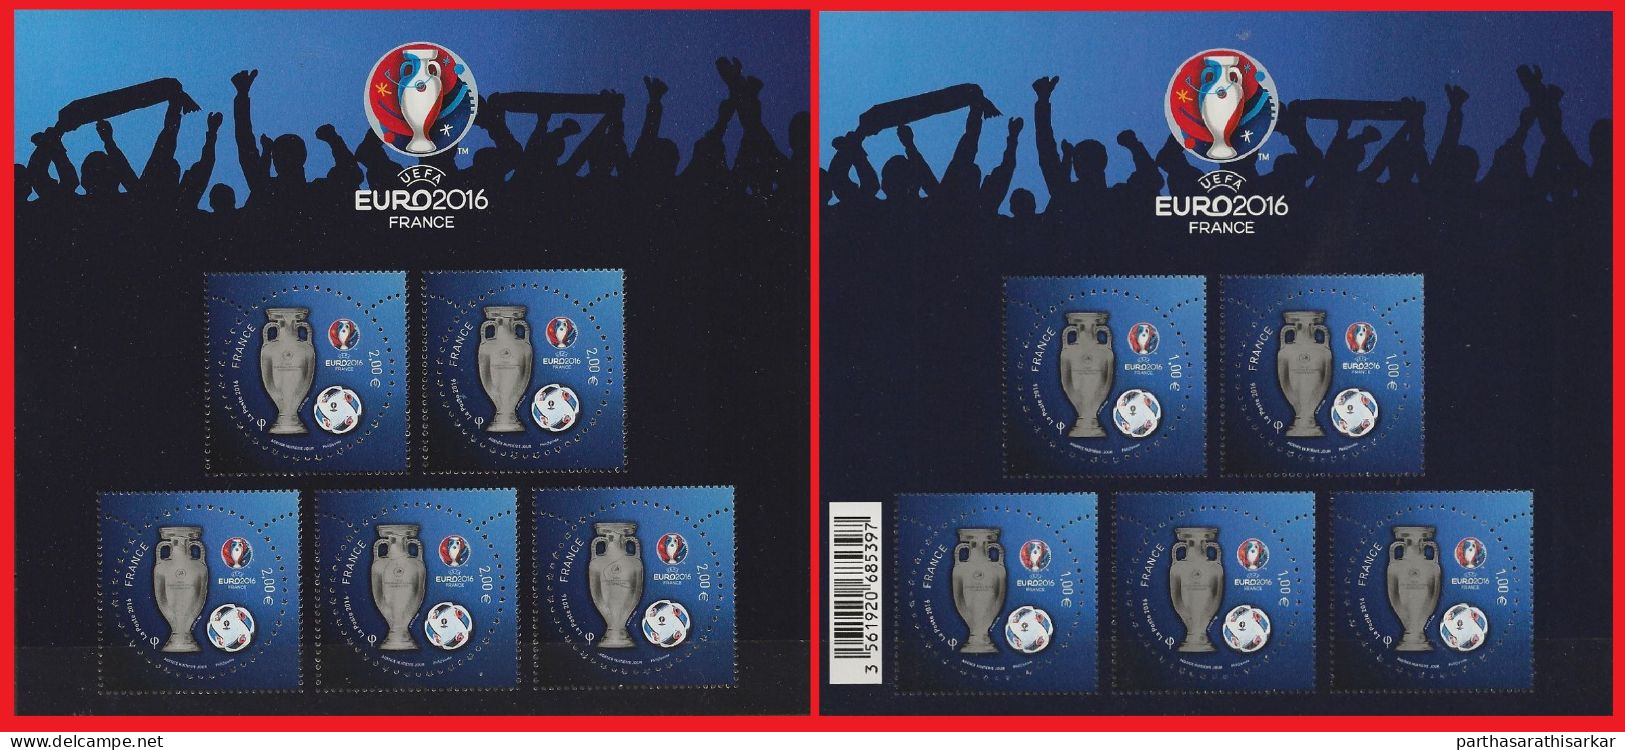 FRANCE 2016 UEFA EUROPEAN FOOTBALL CHAMPIONSHIP 2016 FRANCE SET OF 2 RARE LIMITED ISSUED MINIATURE SHEETS MS MNH - UEFA European Championship